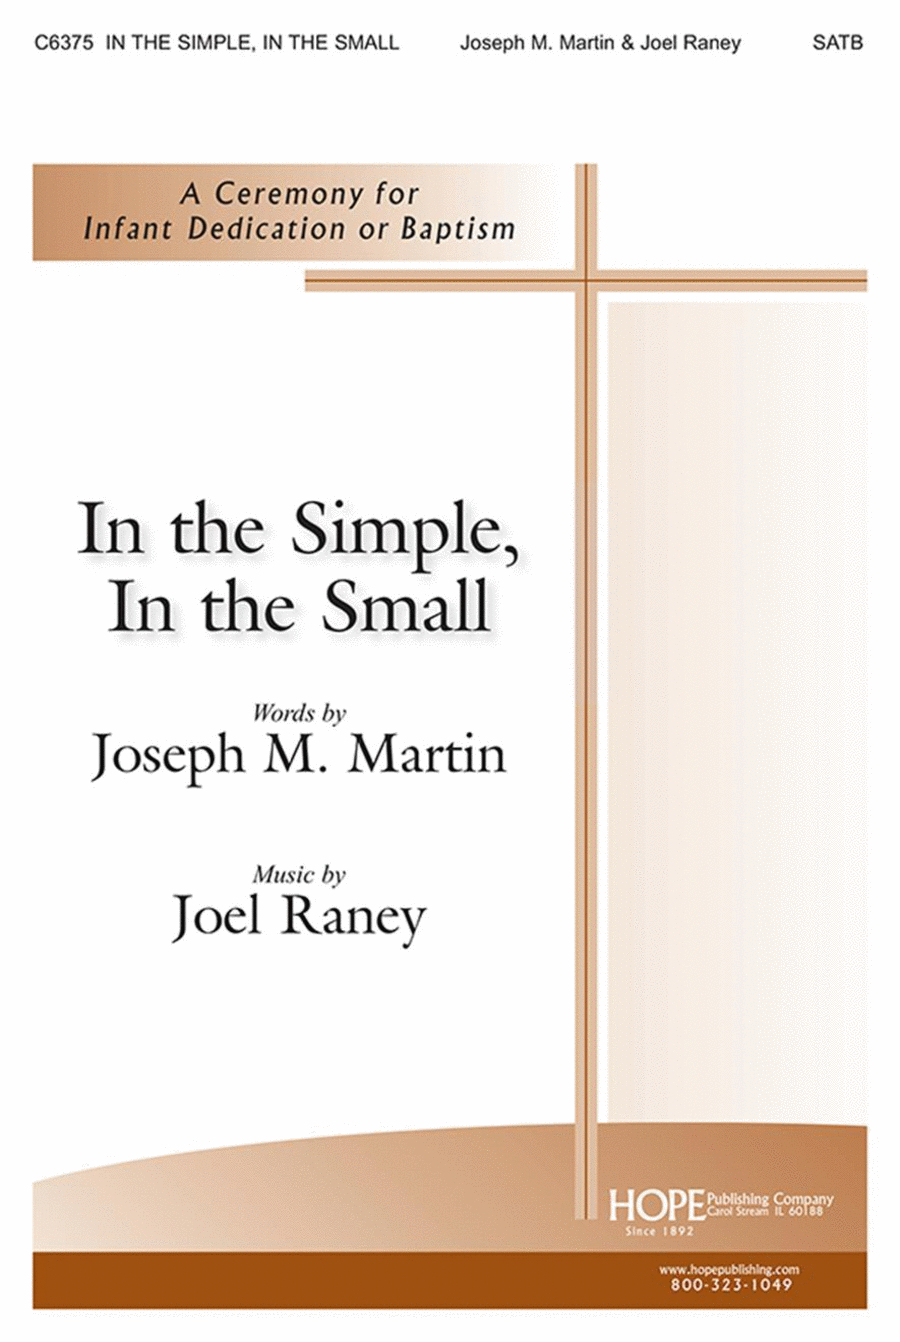 In the Simple, In the Small: A Ceremony for Infant Dedication or Baptism